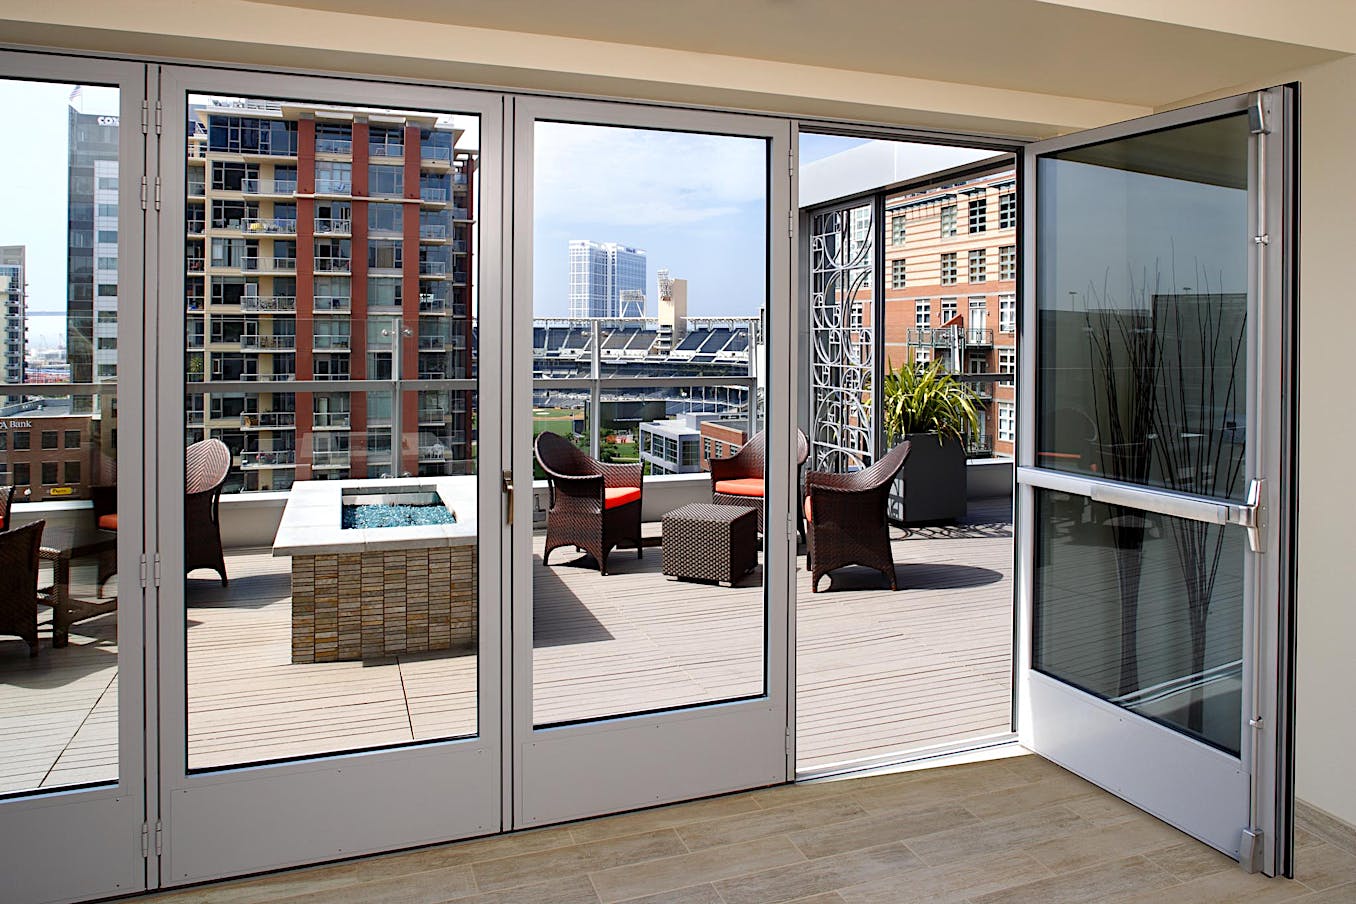 Folding glass doors with a view of a city